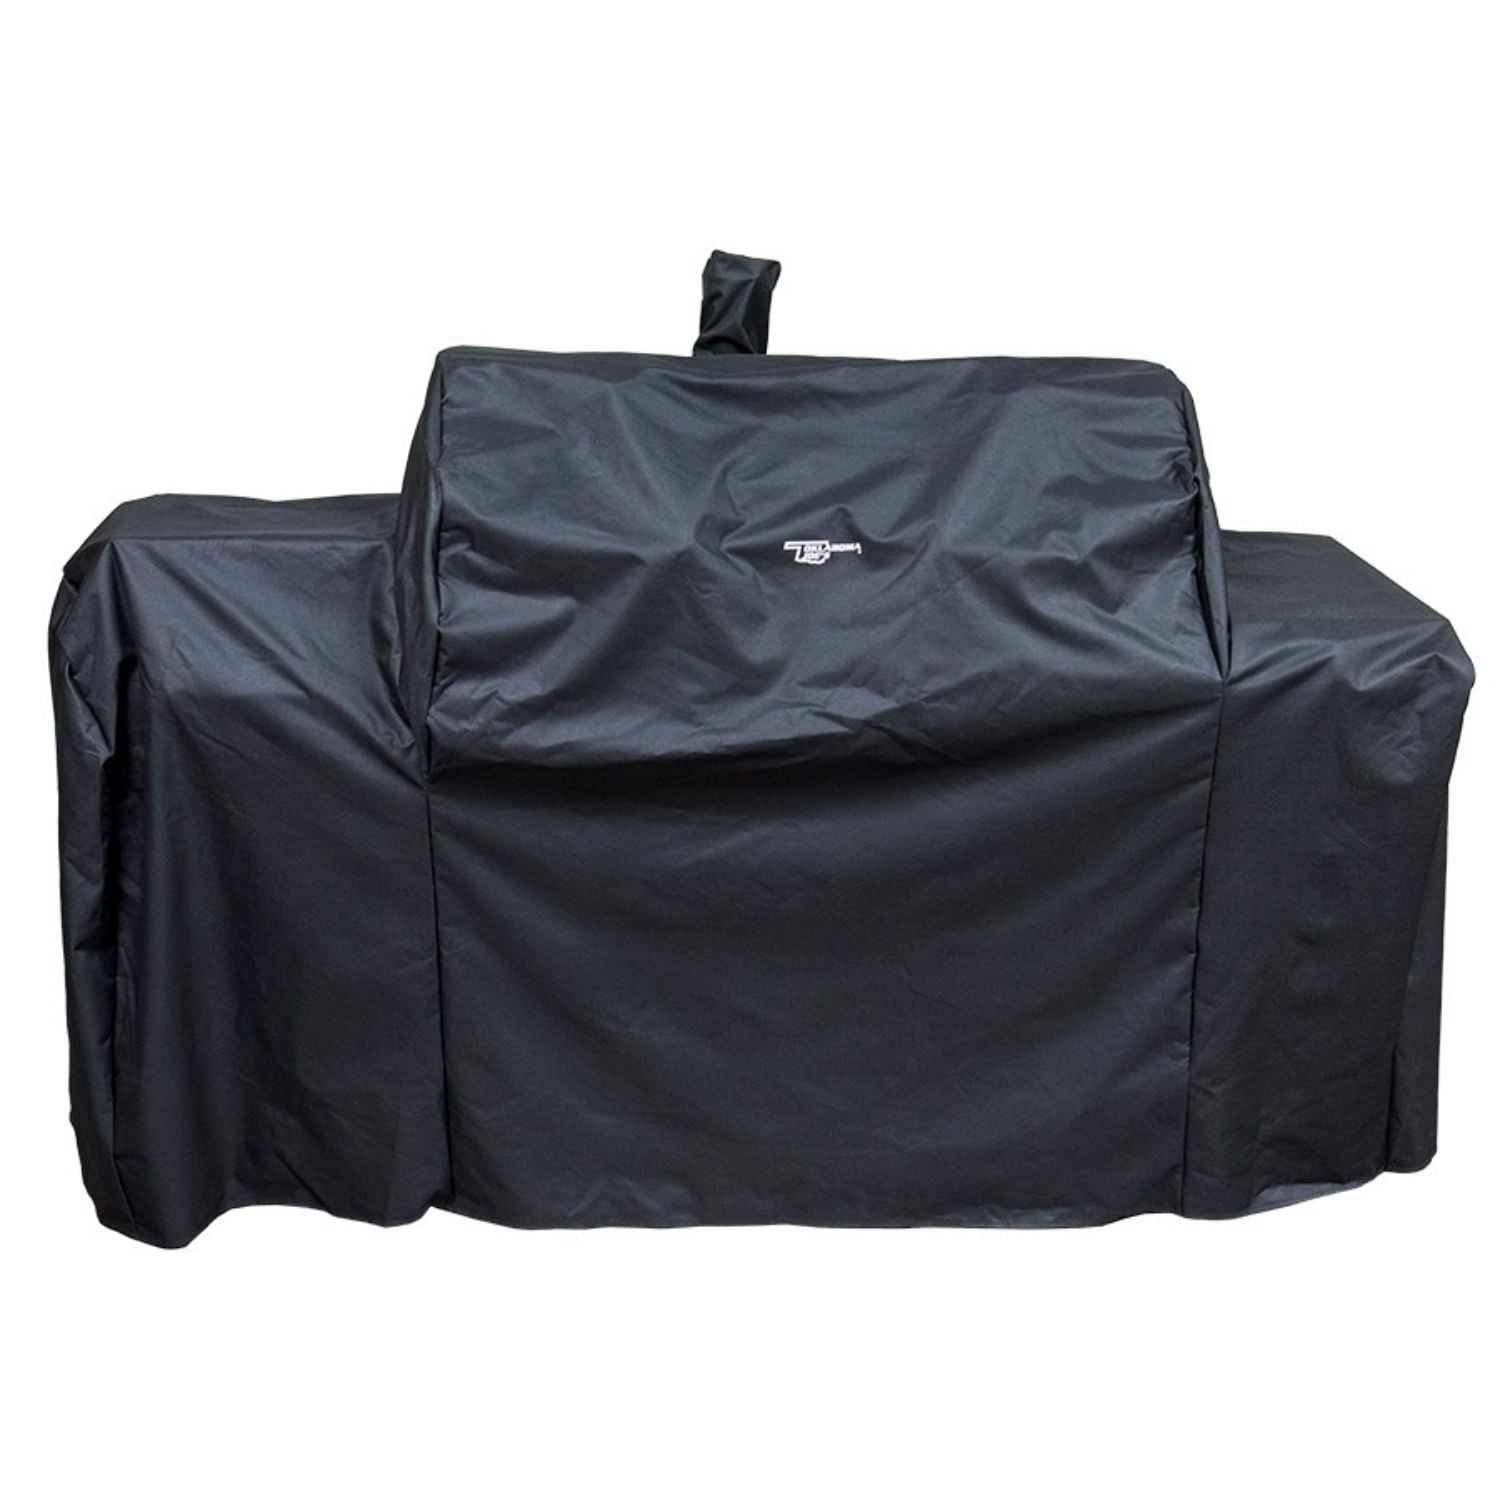 Picture of Char-Broil 8694002 36.5 x 66.5 x 38 in. Black Grill Cover for Oklahoma Joes Longhorn Smoker